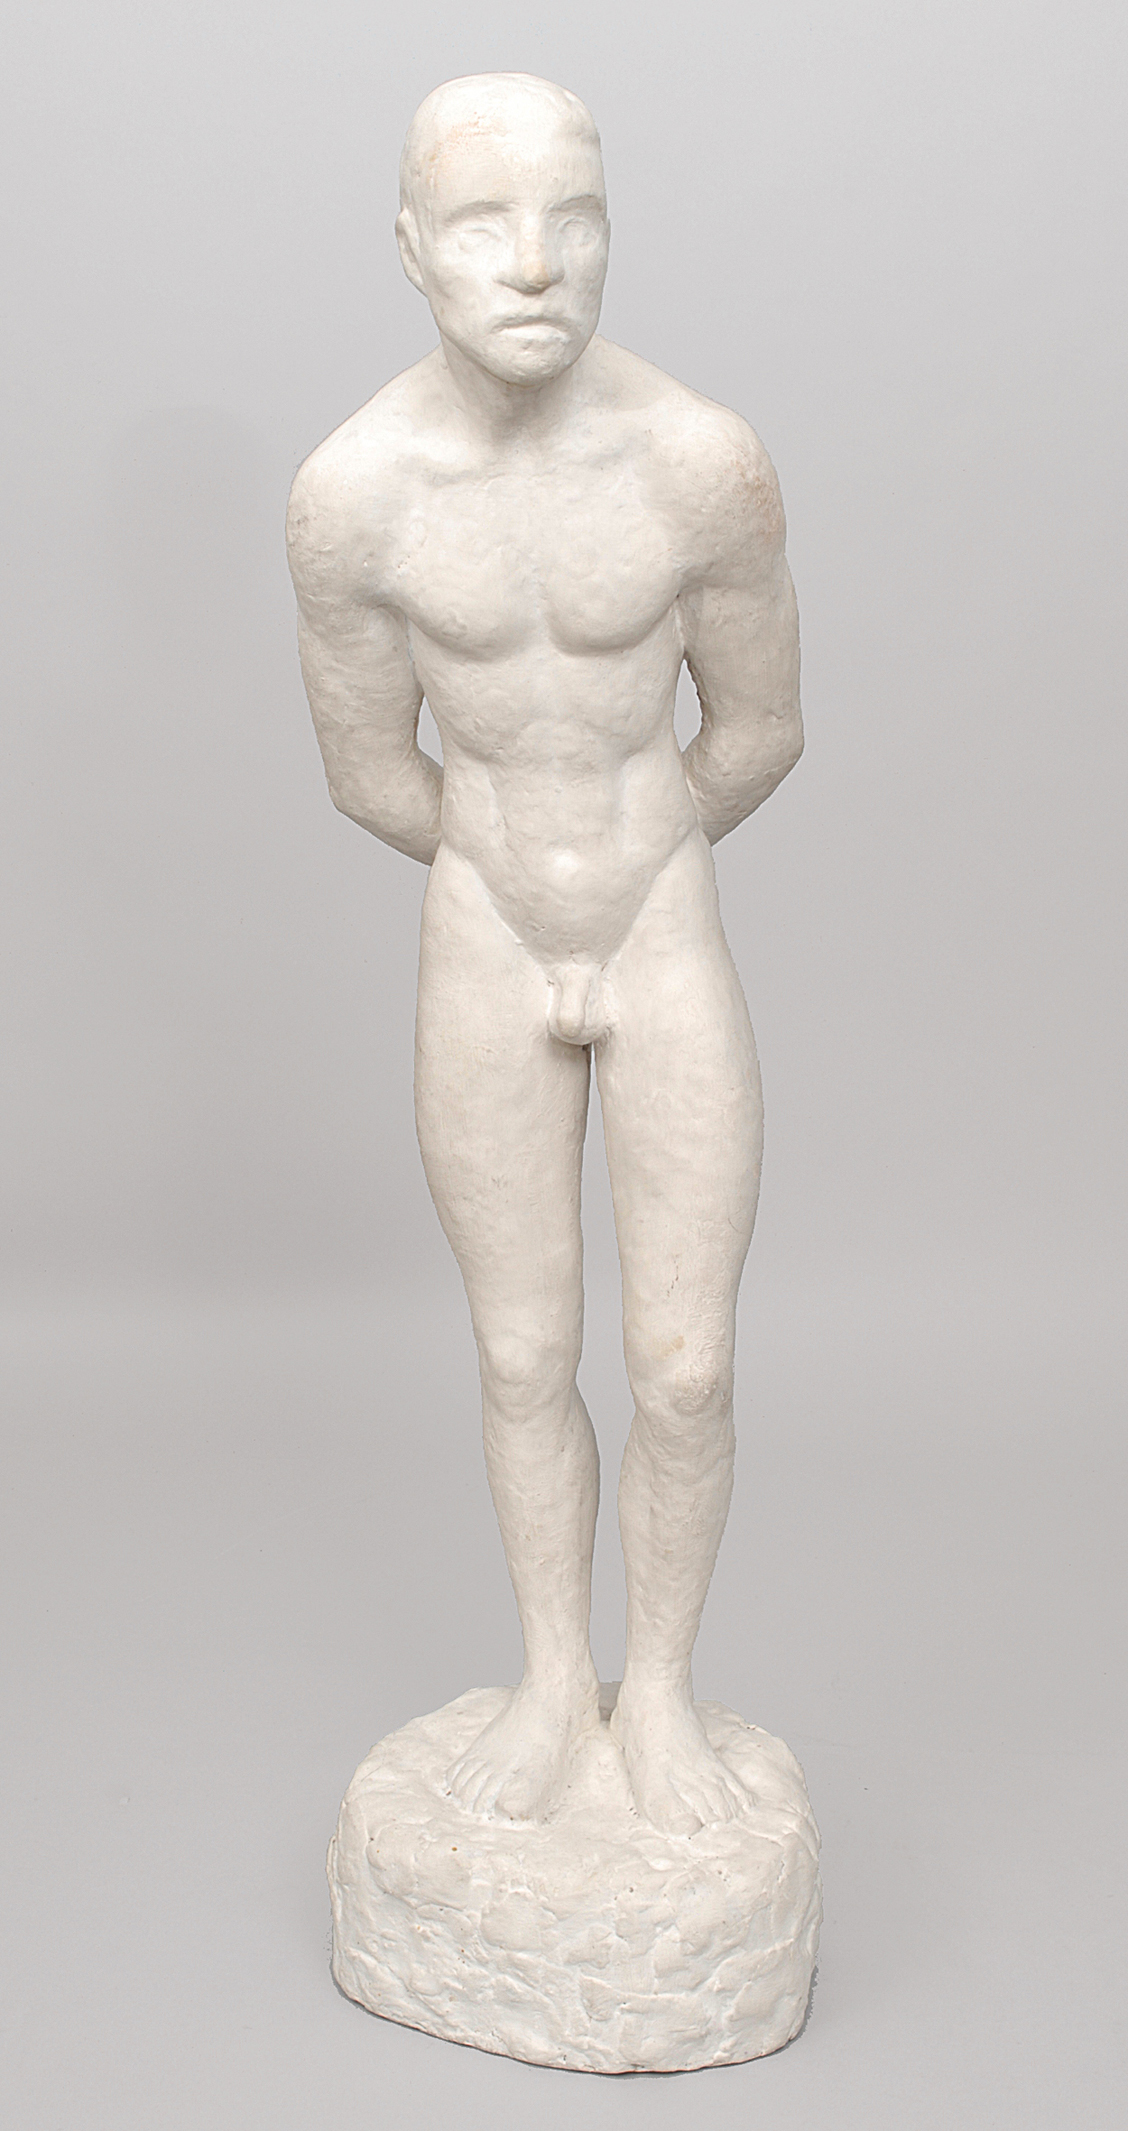 A large figure of a young man